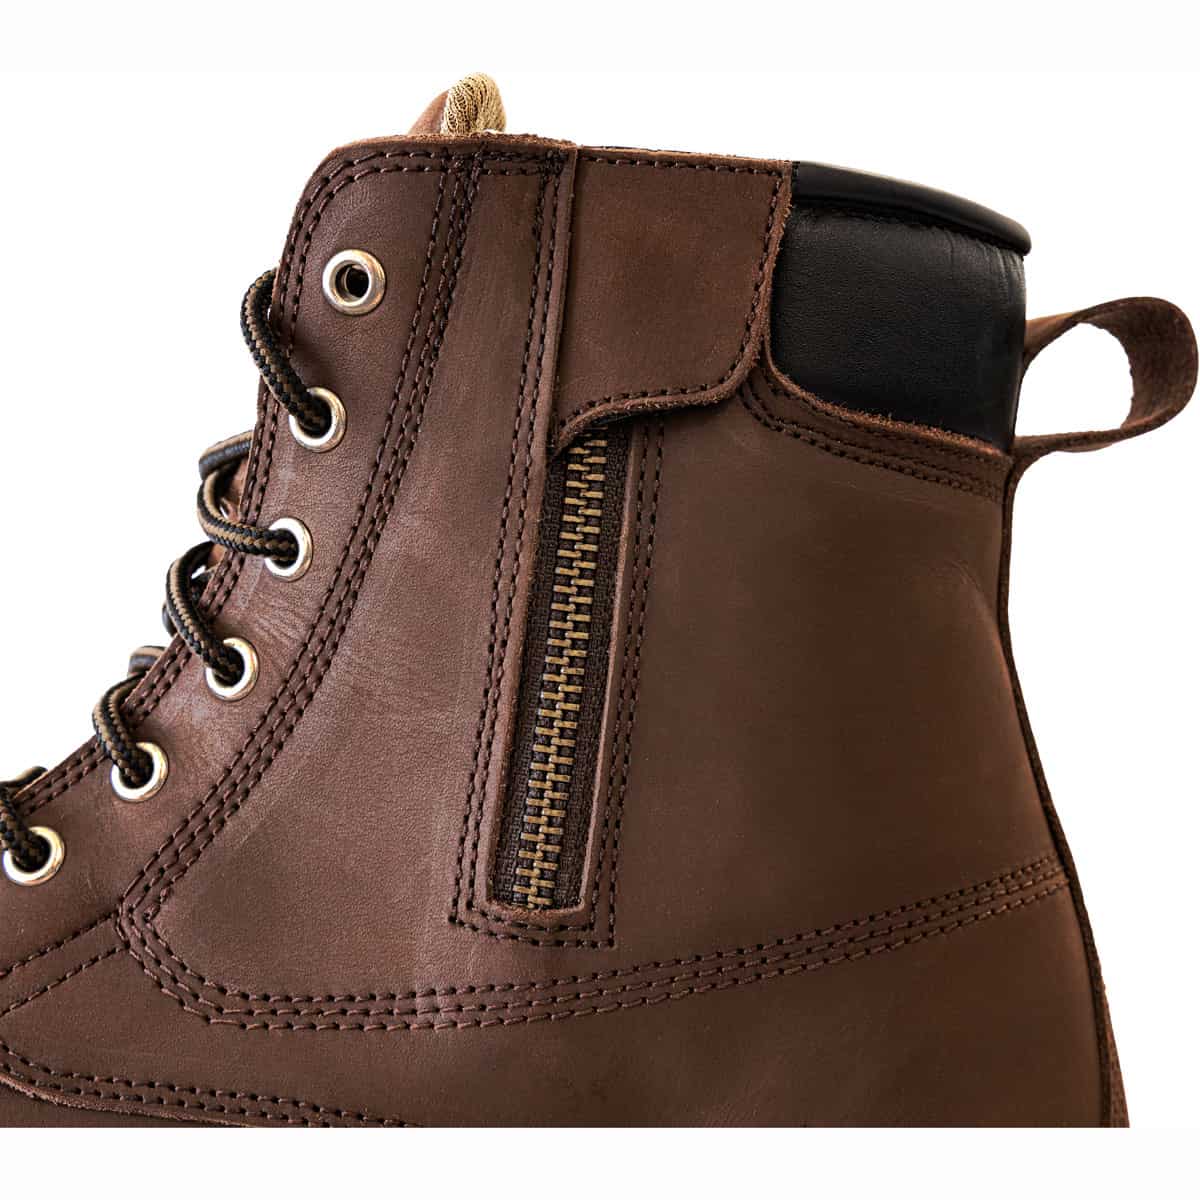 Richa Calgary Casual motorcycle boots: 100% leather construction with timeless design - zip closeup up 